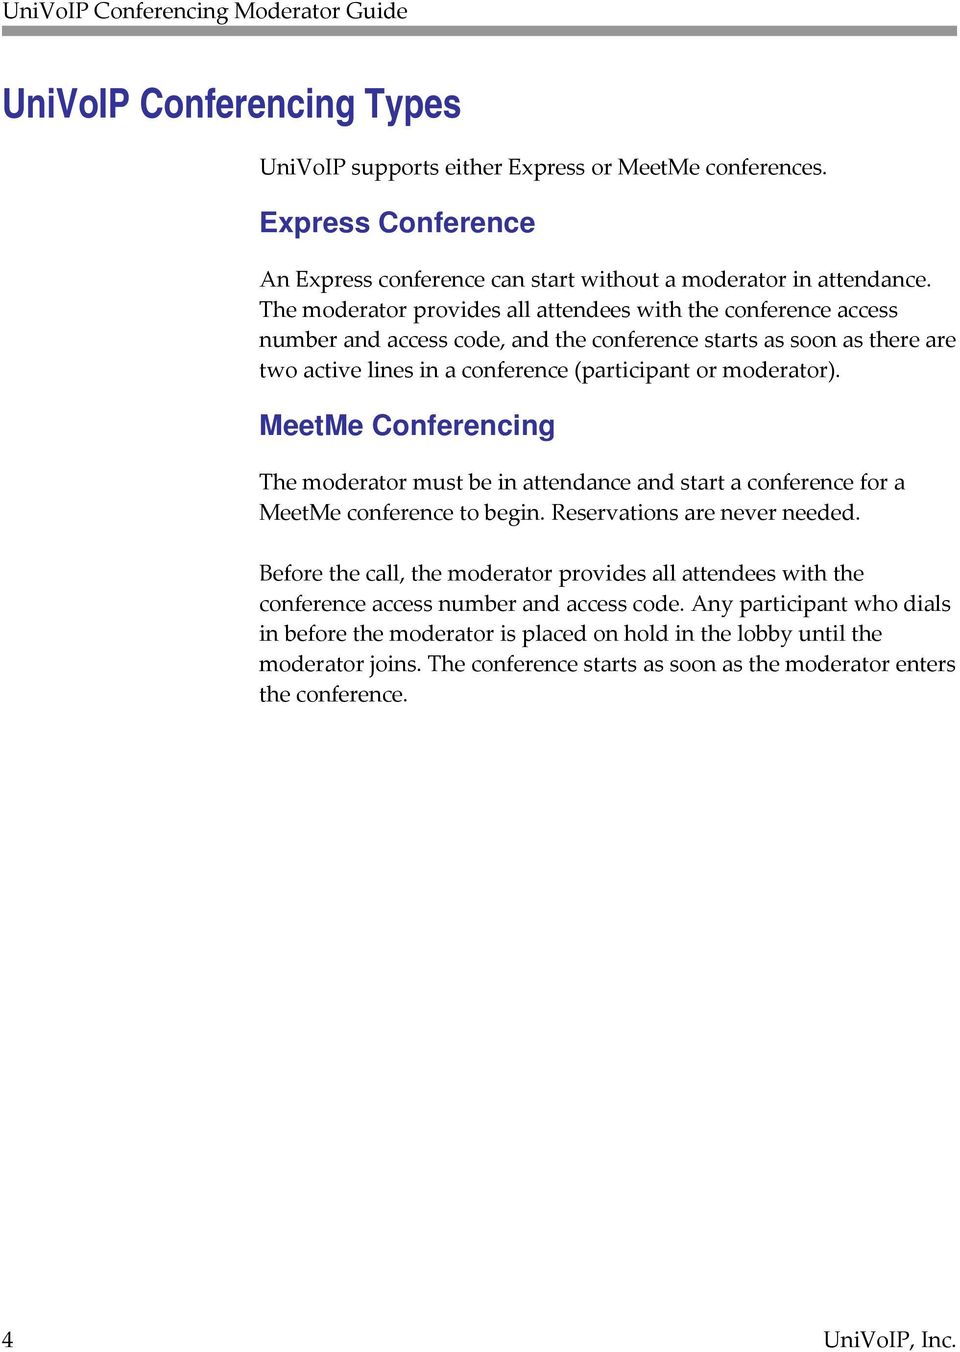 The moderator provides all attendees with the conference access number and access code, and the conference starts as soon as there are two active lines in a conference (participant or moderator).